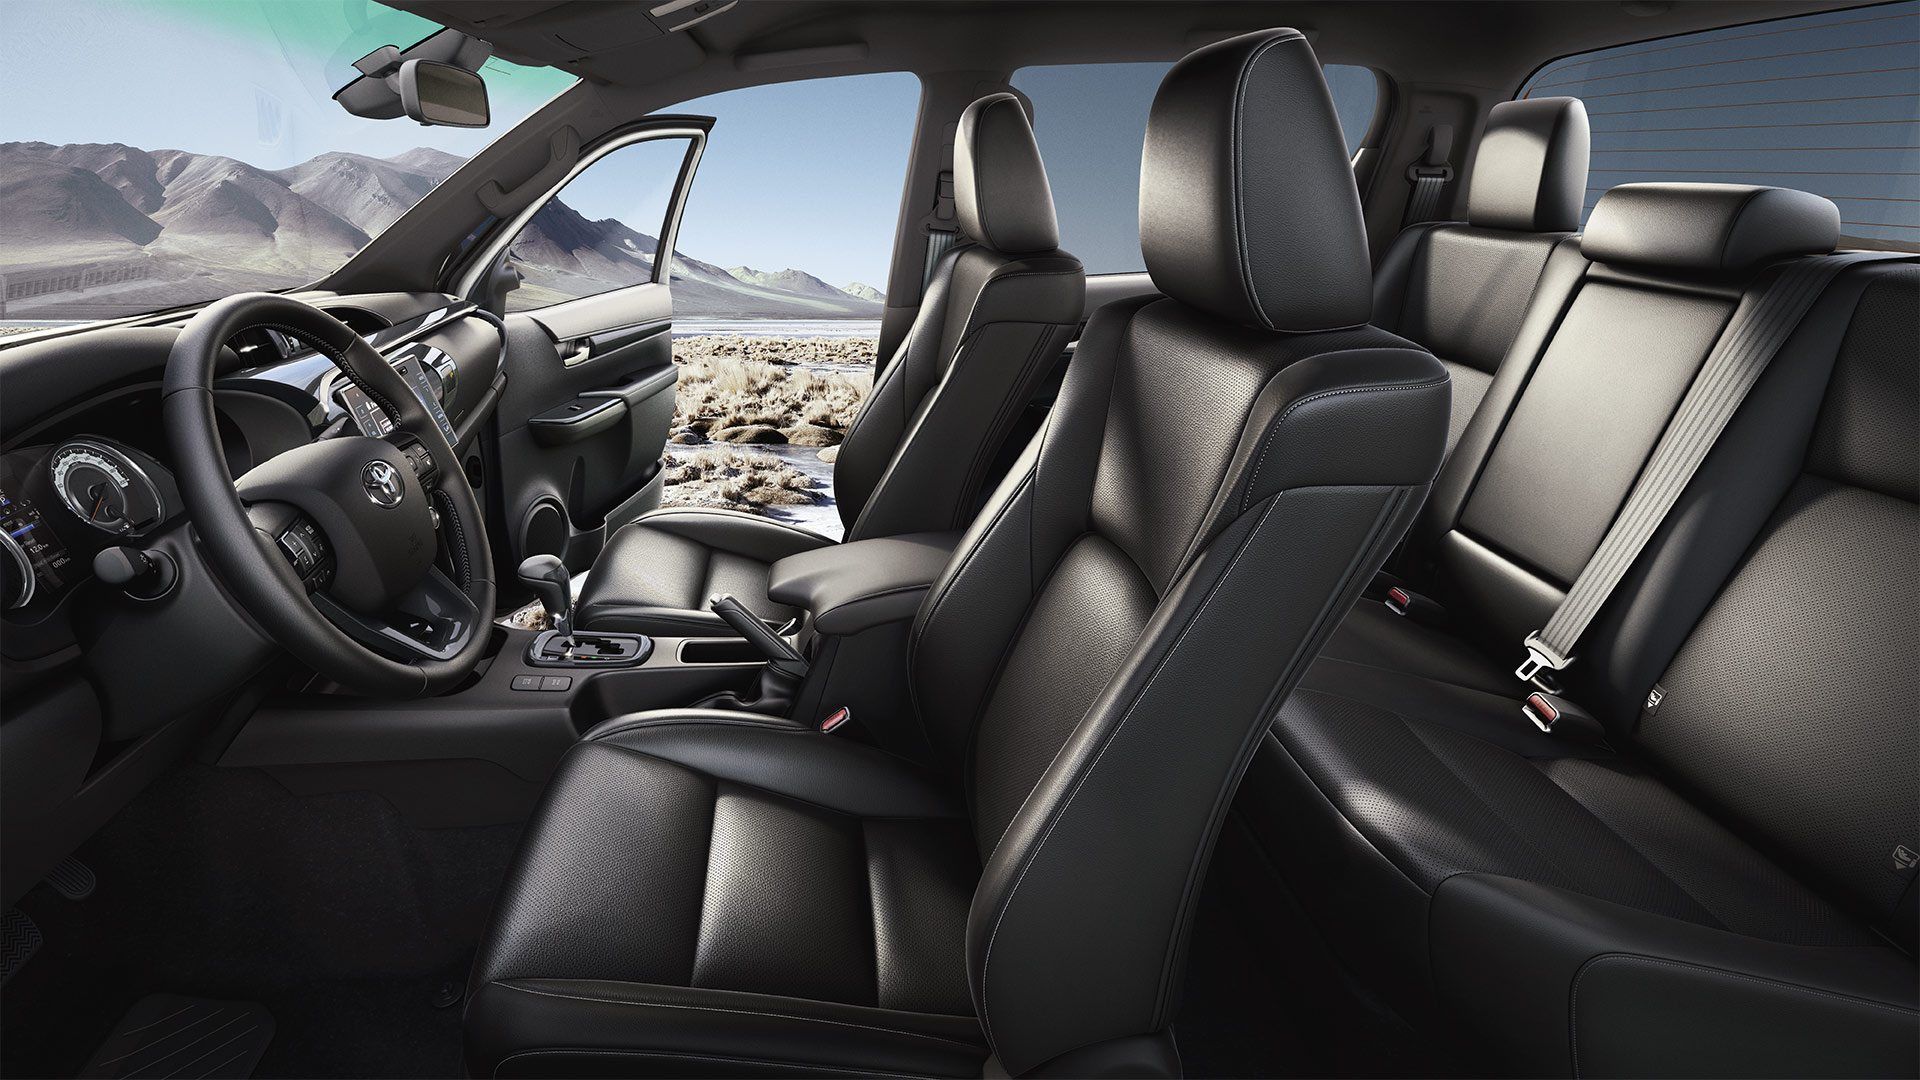 toyota fortuner Interior. Sporty suv, Toyota, New cars